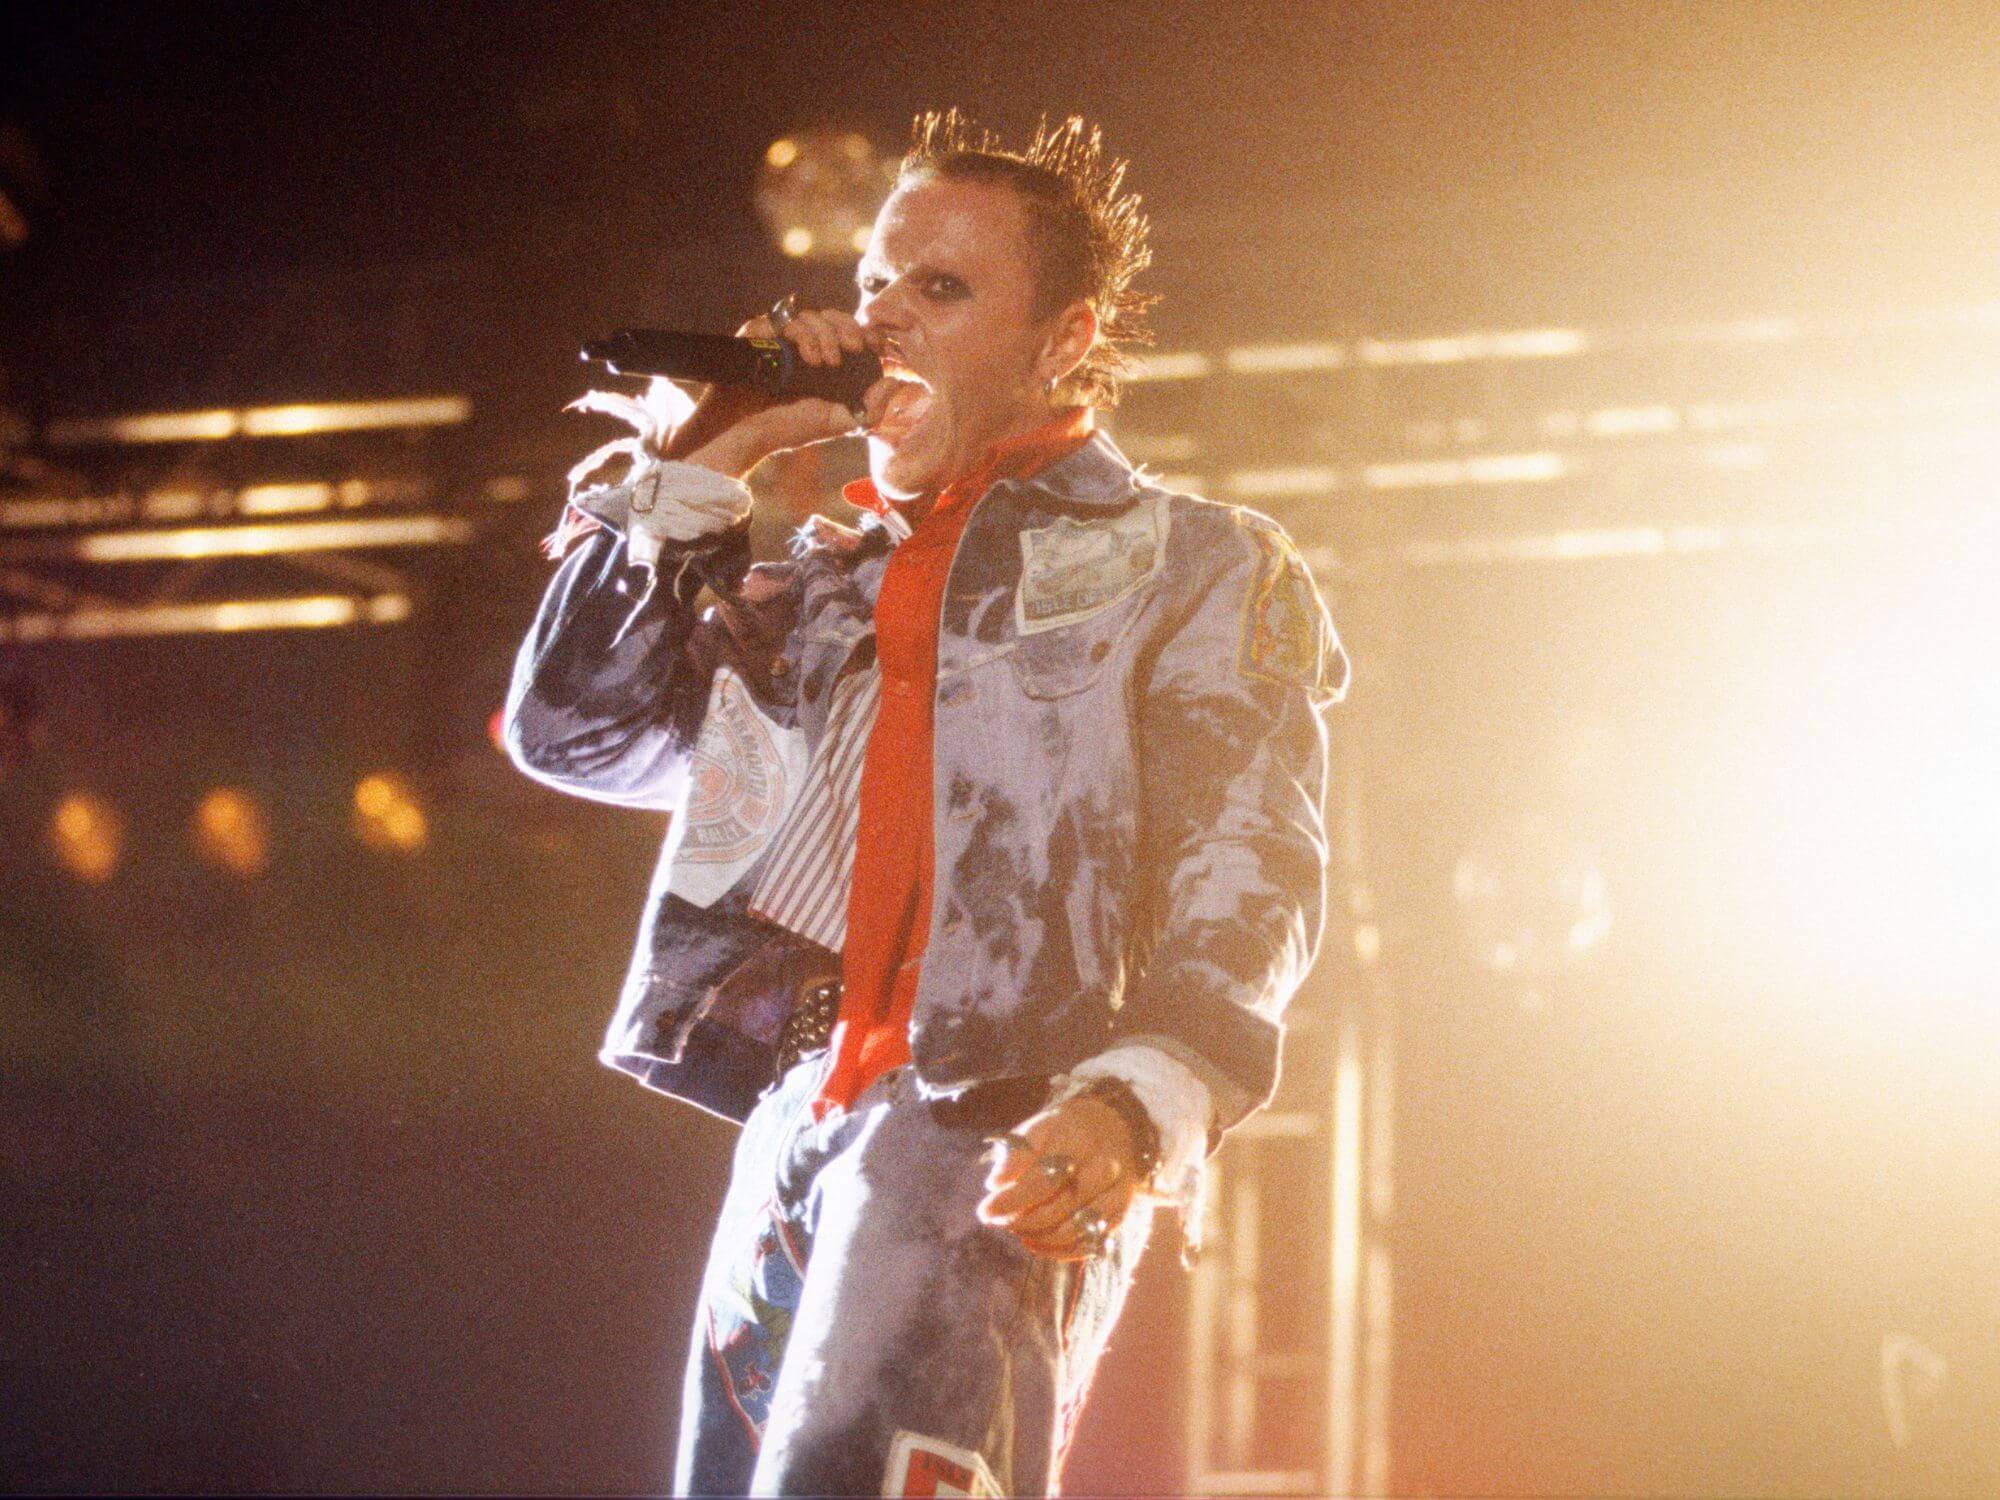 The Prodigy's Keith Flint performing onstage